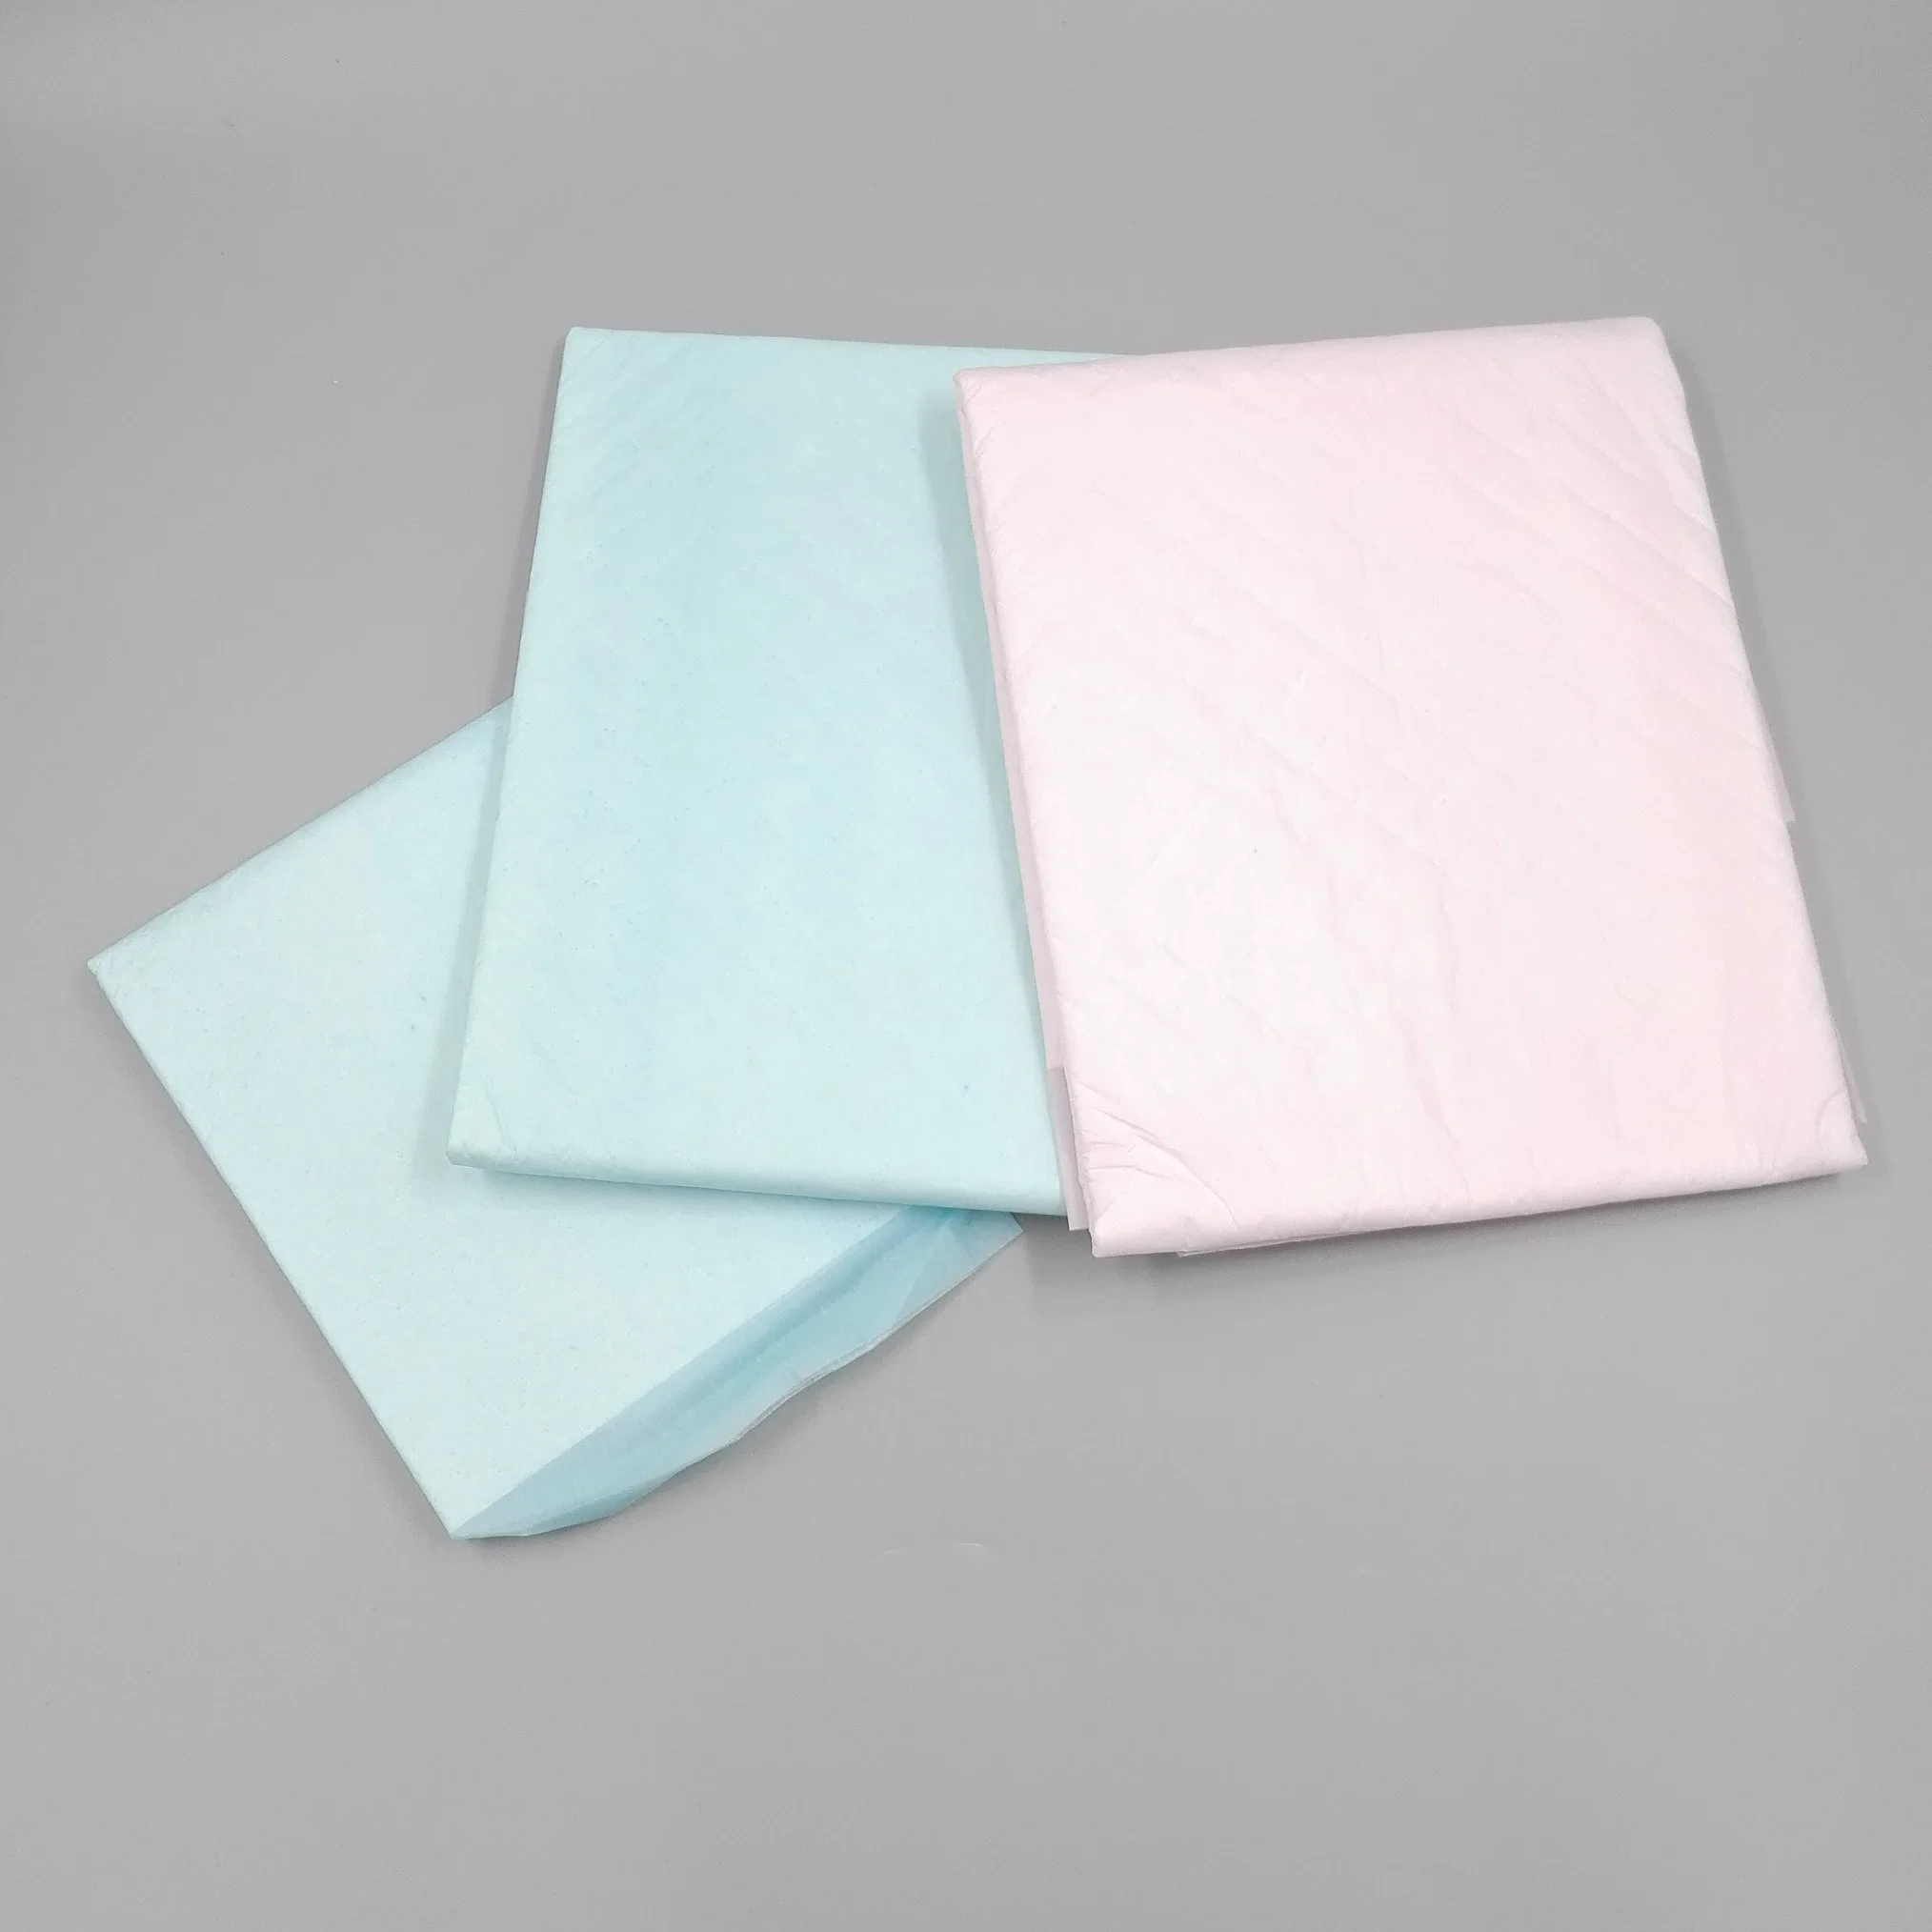 Adult or Baby or Pet Care Pad Diaper